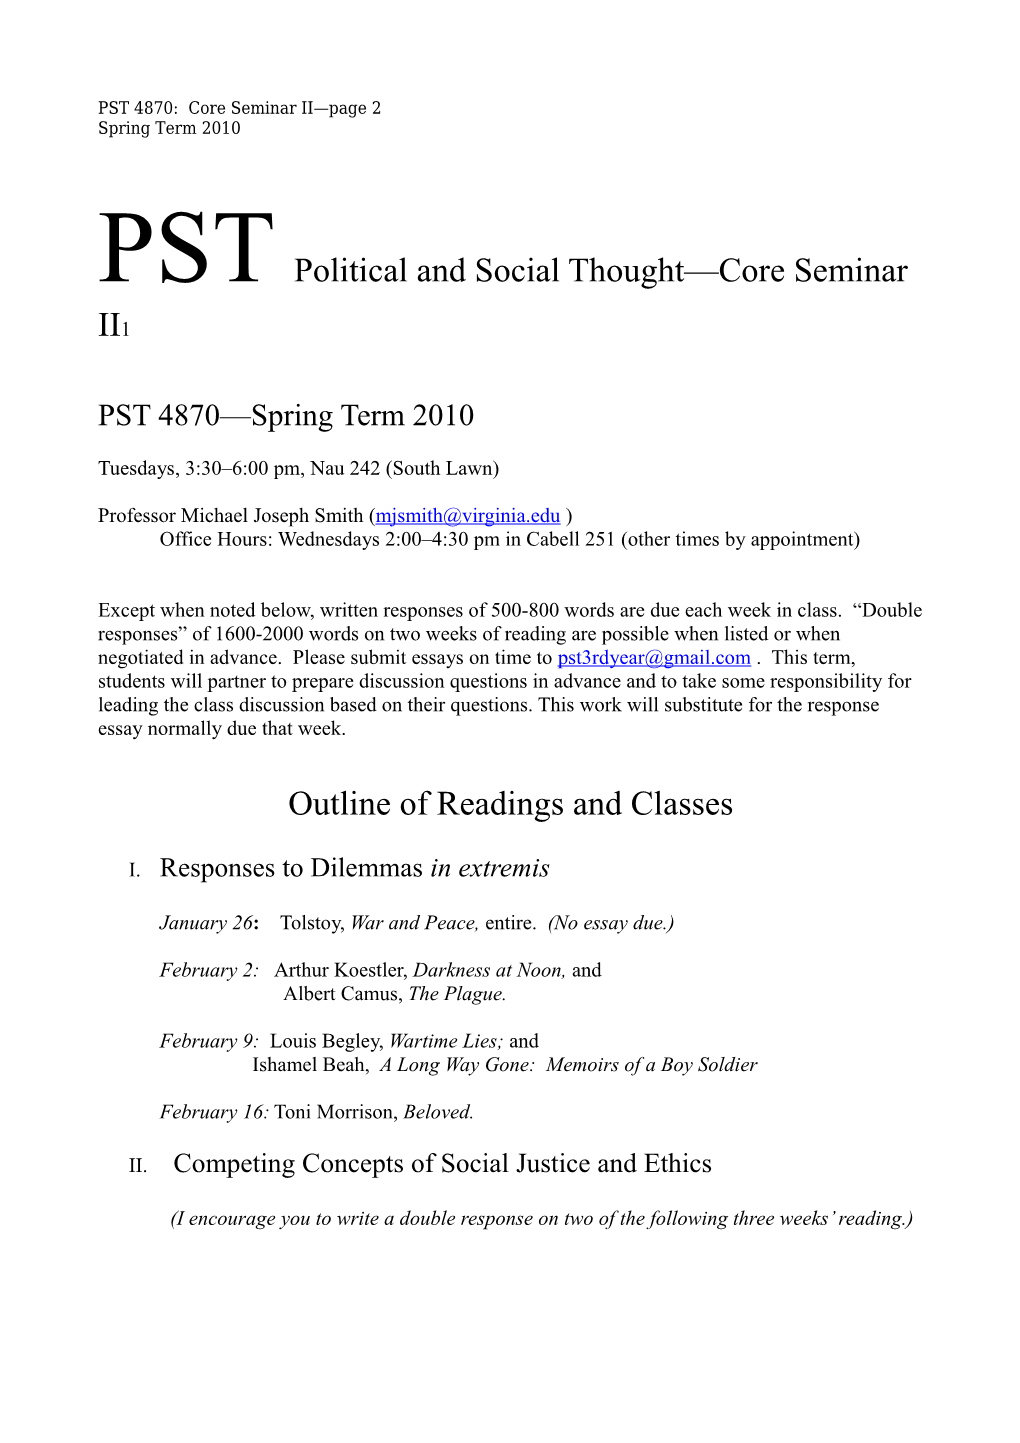 PST Political and Social Thought Third Year Seminar